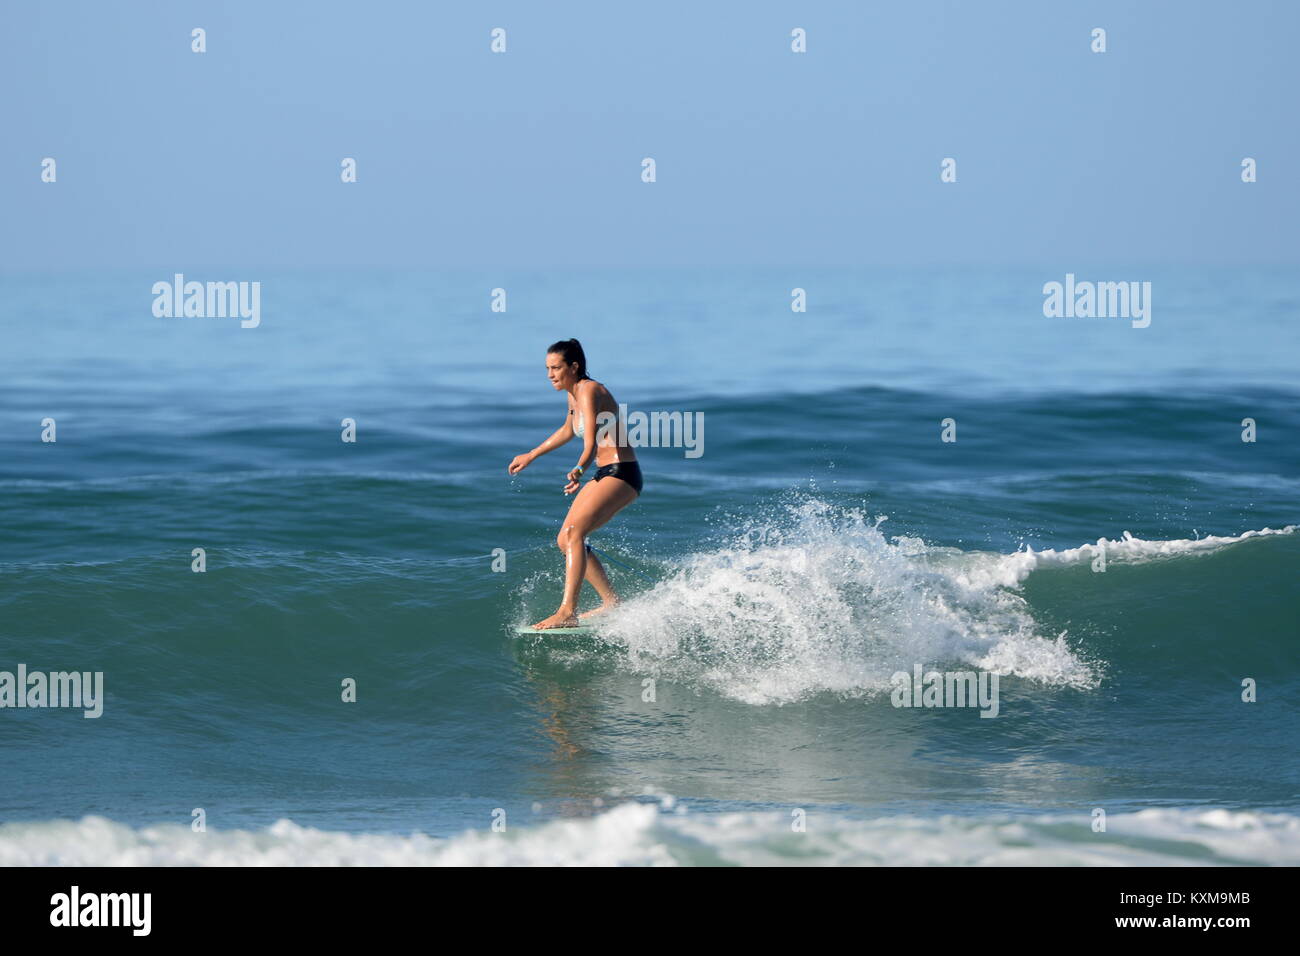 Surfing in Costa Rica .Girls hang five Stock Photo: 171321035 - Alamy